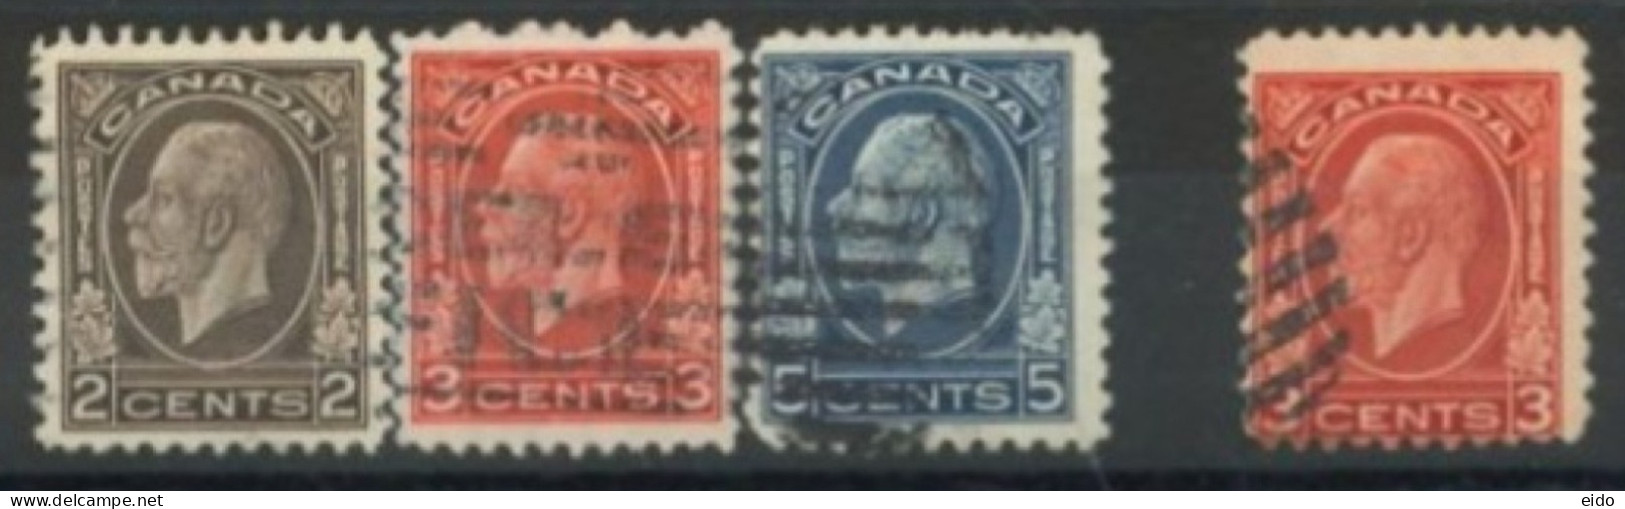 CANADA - 1932, KING GEORGE V STAMPS SET OF 4, USED. - Usati